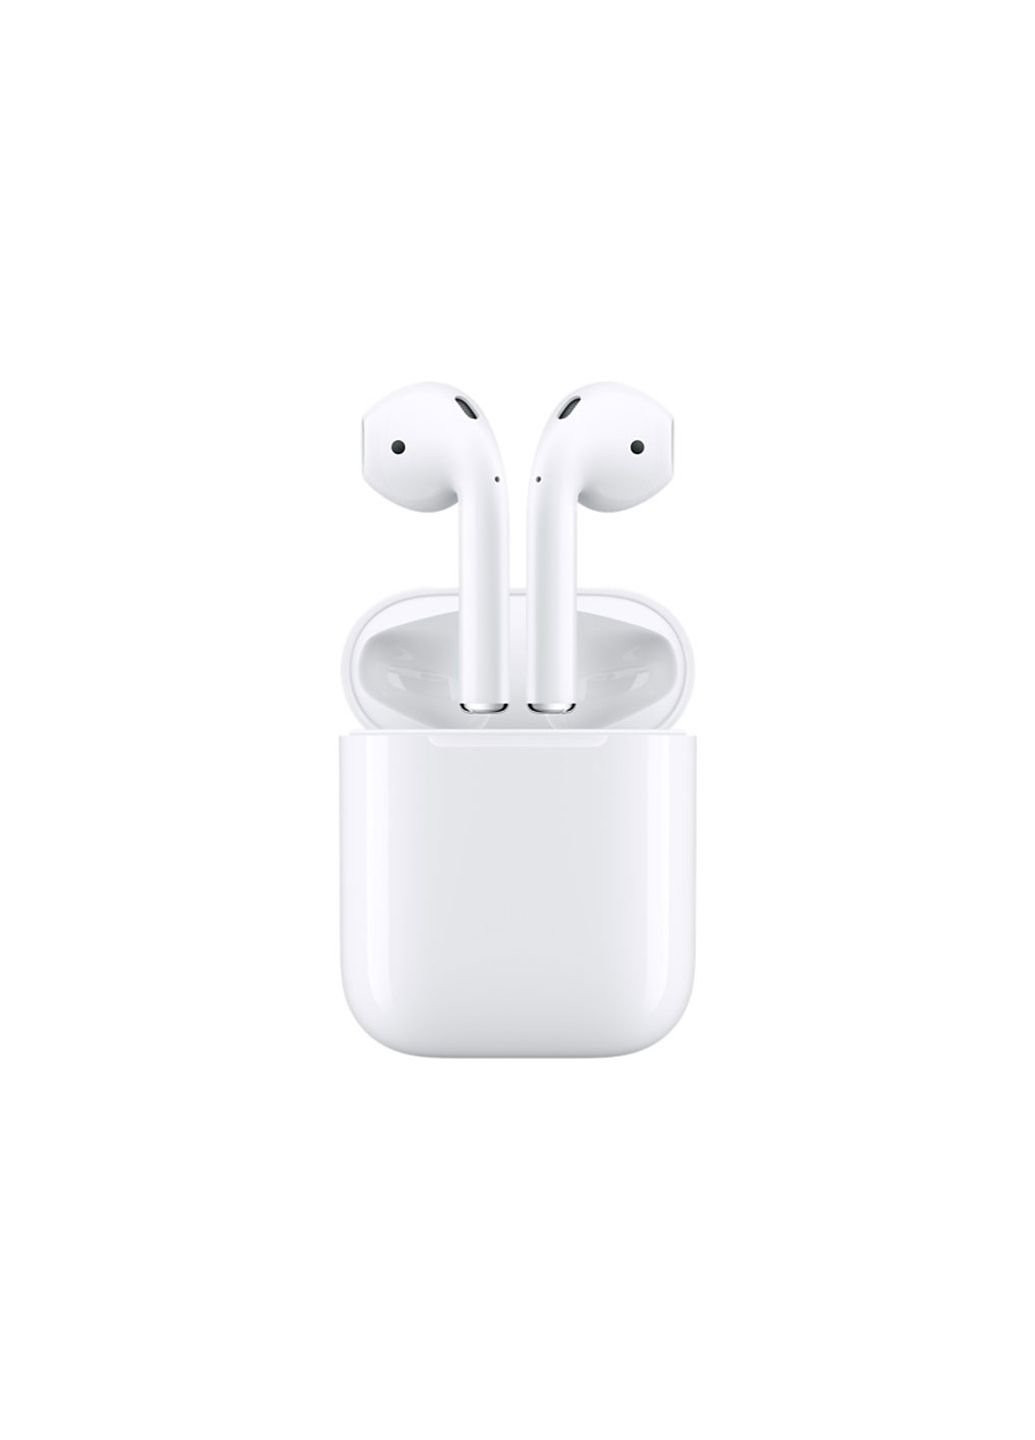 Наушники (MV7N2TY/A) Apple airpods with charging case (253442654)